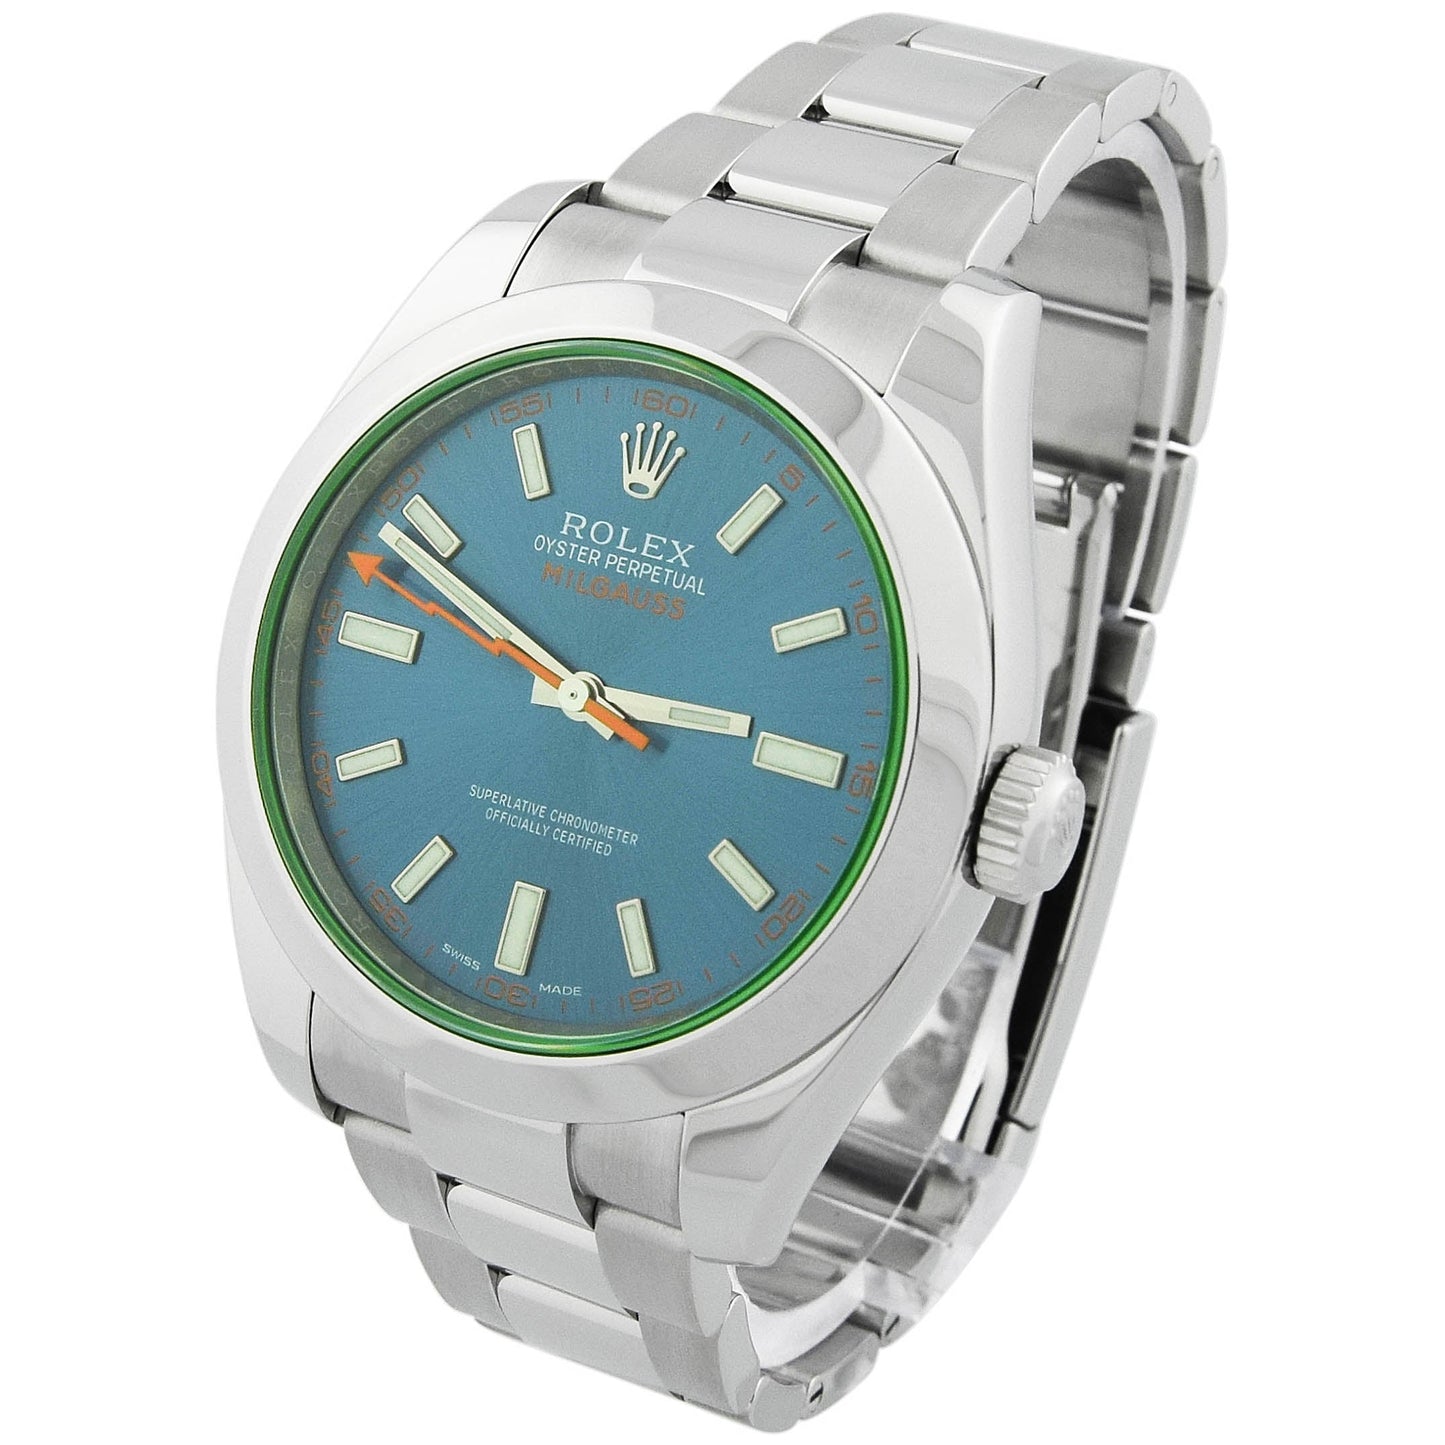 Rolex Oyster Perpetual "Milgauss" 40mm Stainless Steel Blue Stick Dial Watch Reference #: 116400GV